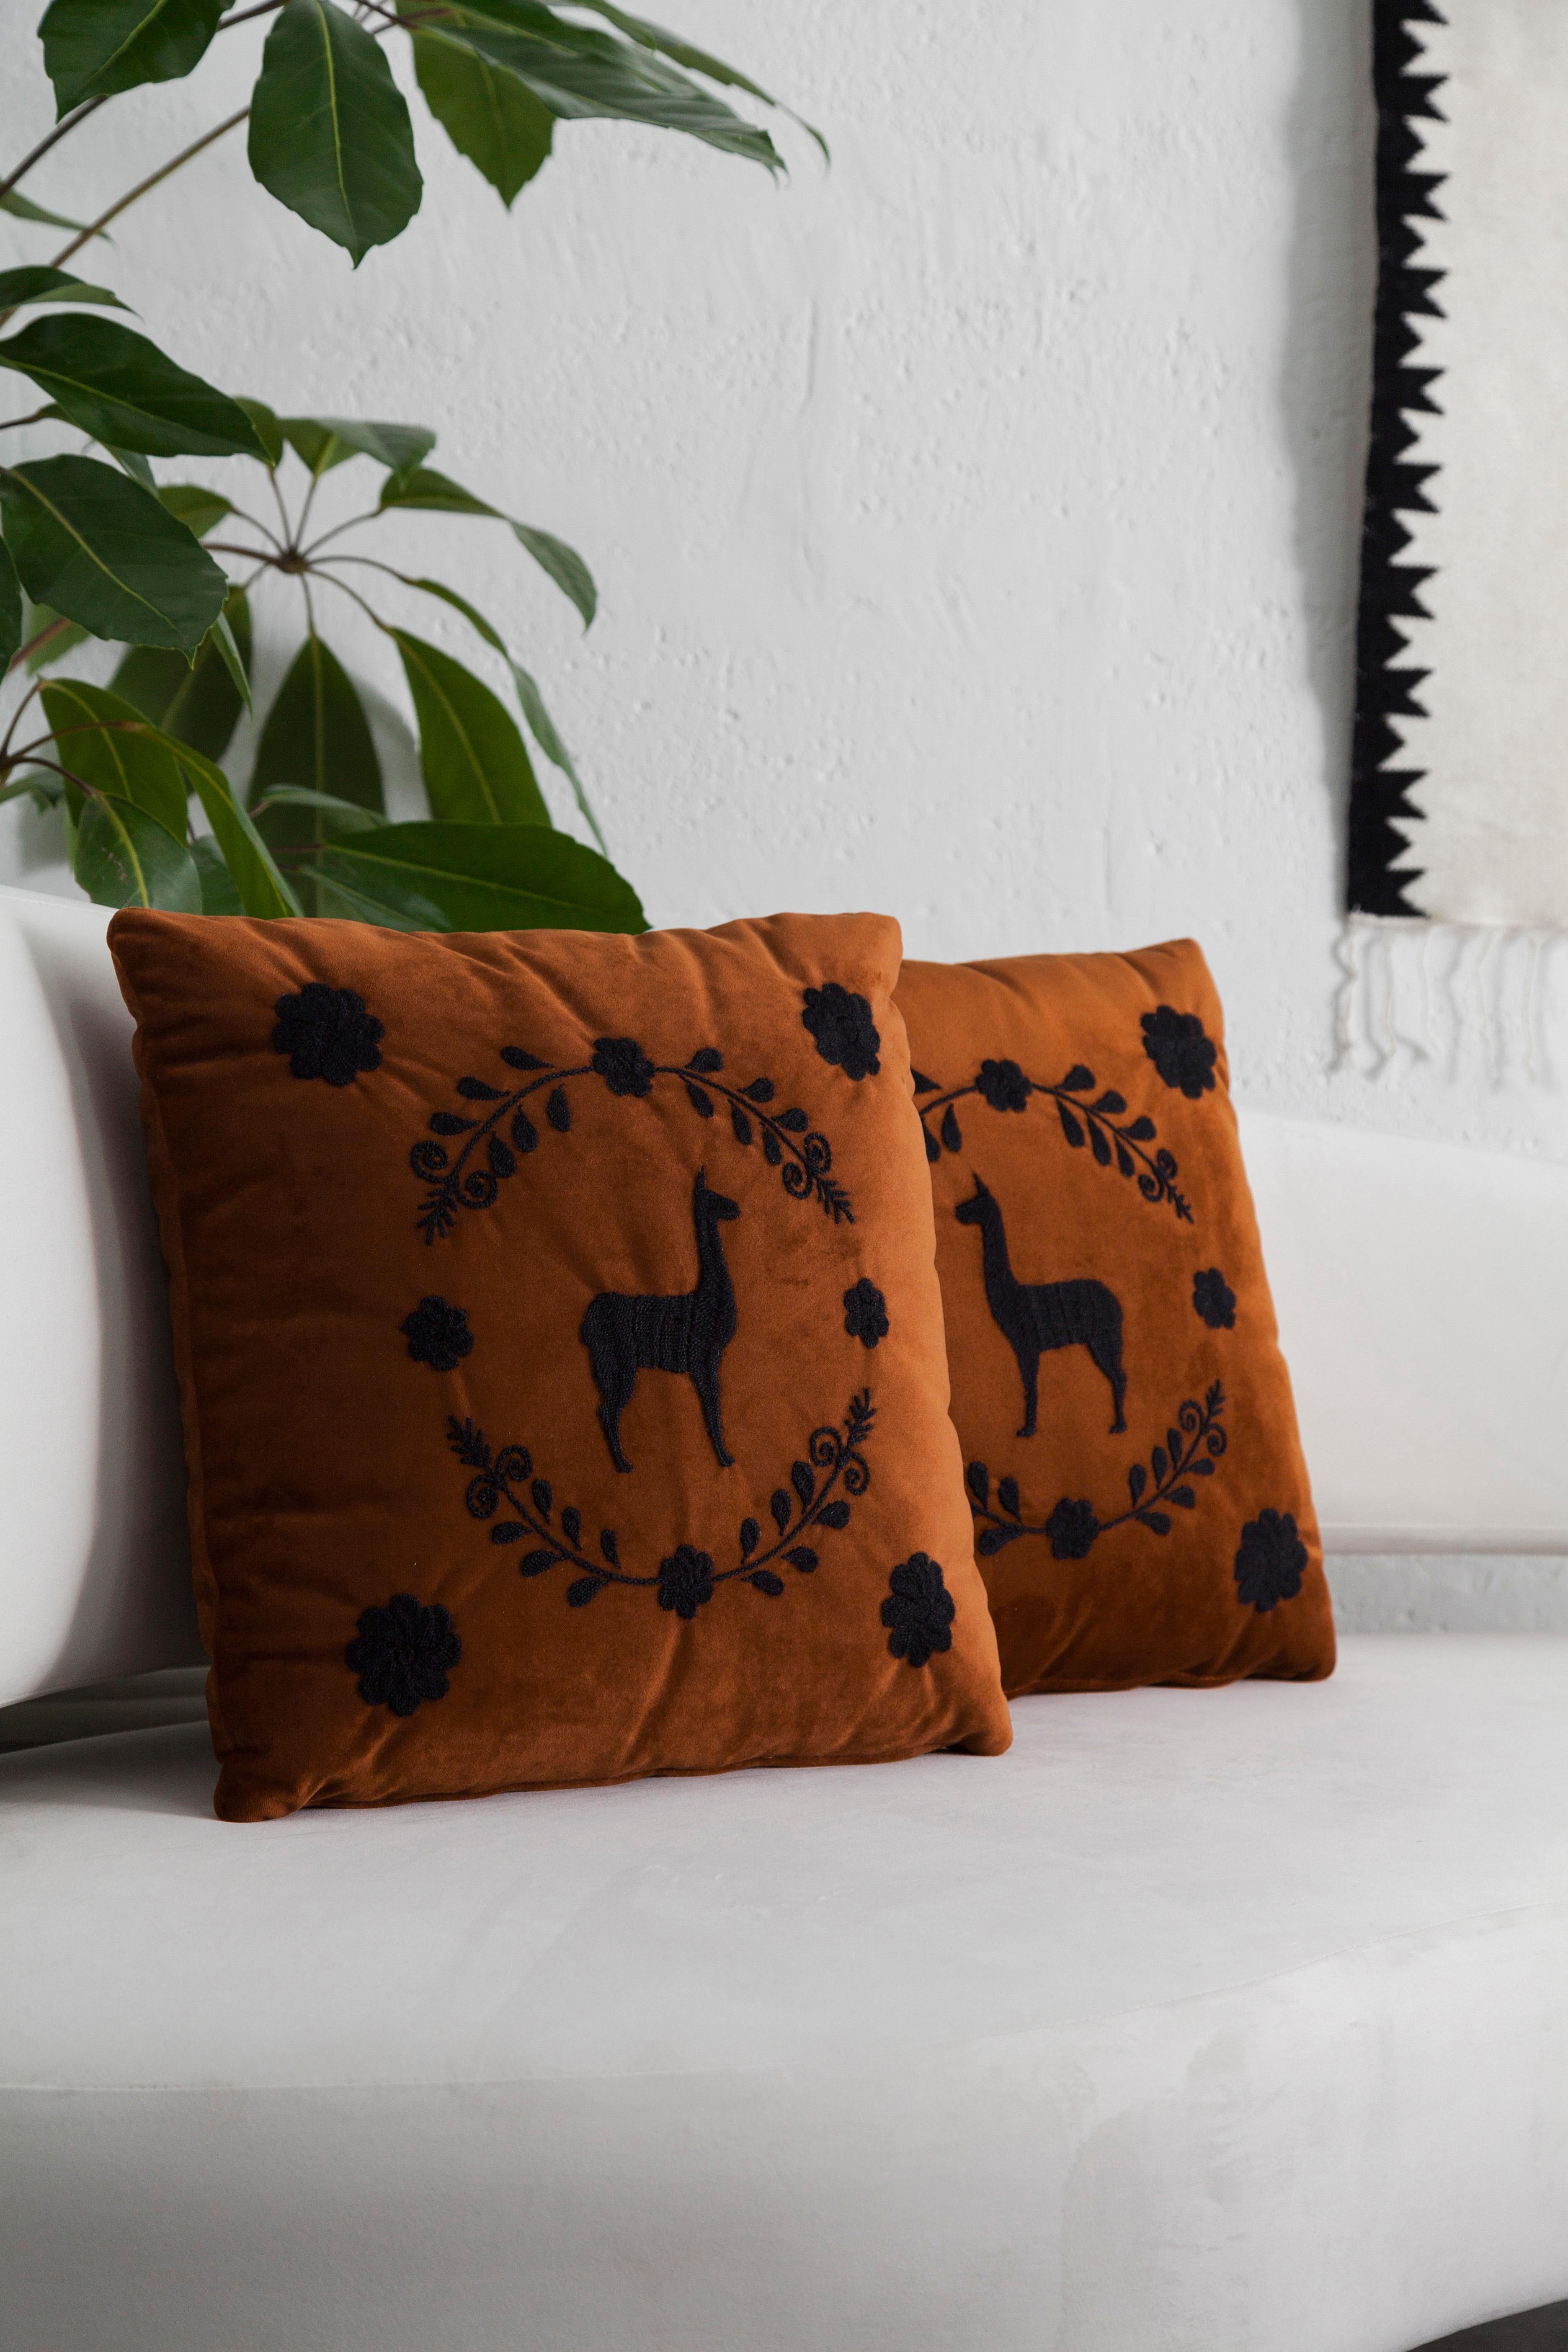 Upholstery LLAMA Hand Embroidered Decorative Pillows Terracota Velvet by ANDEAN, Set of 2 For Sale